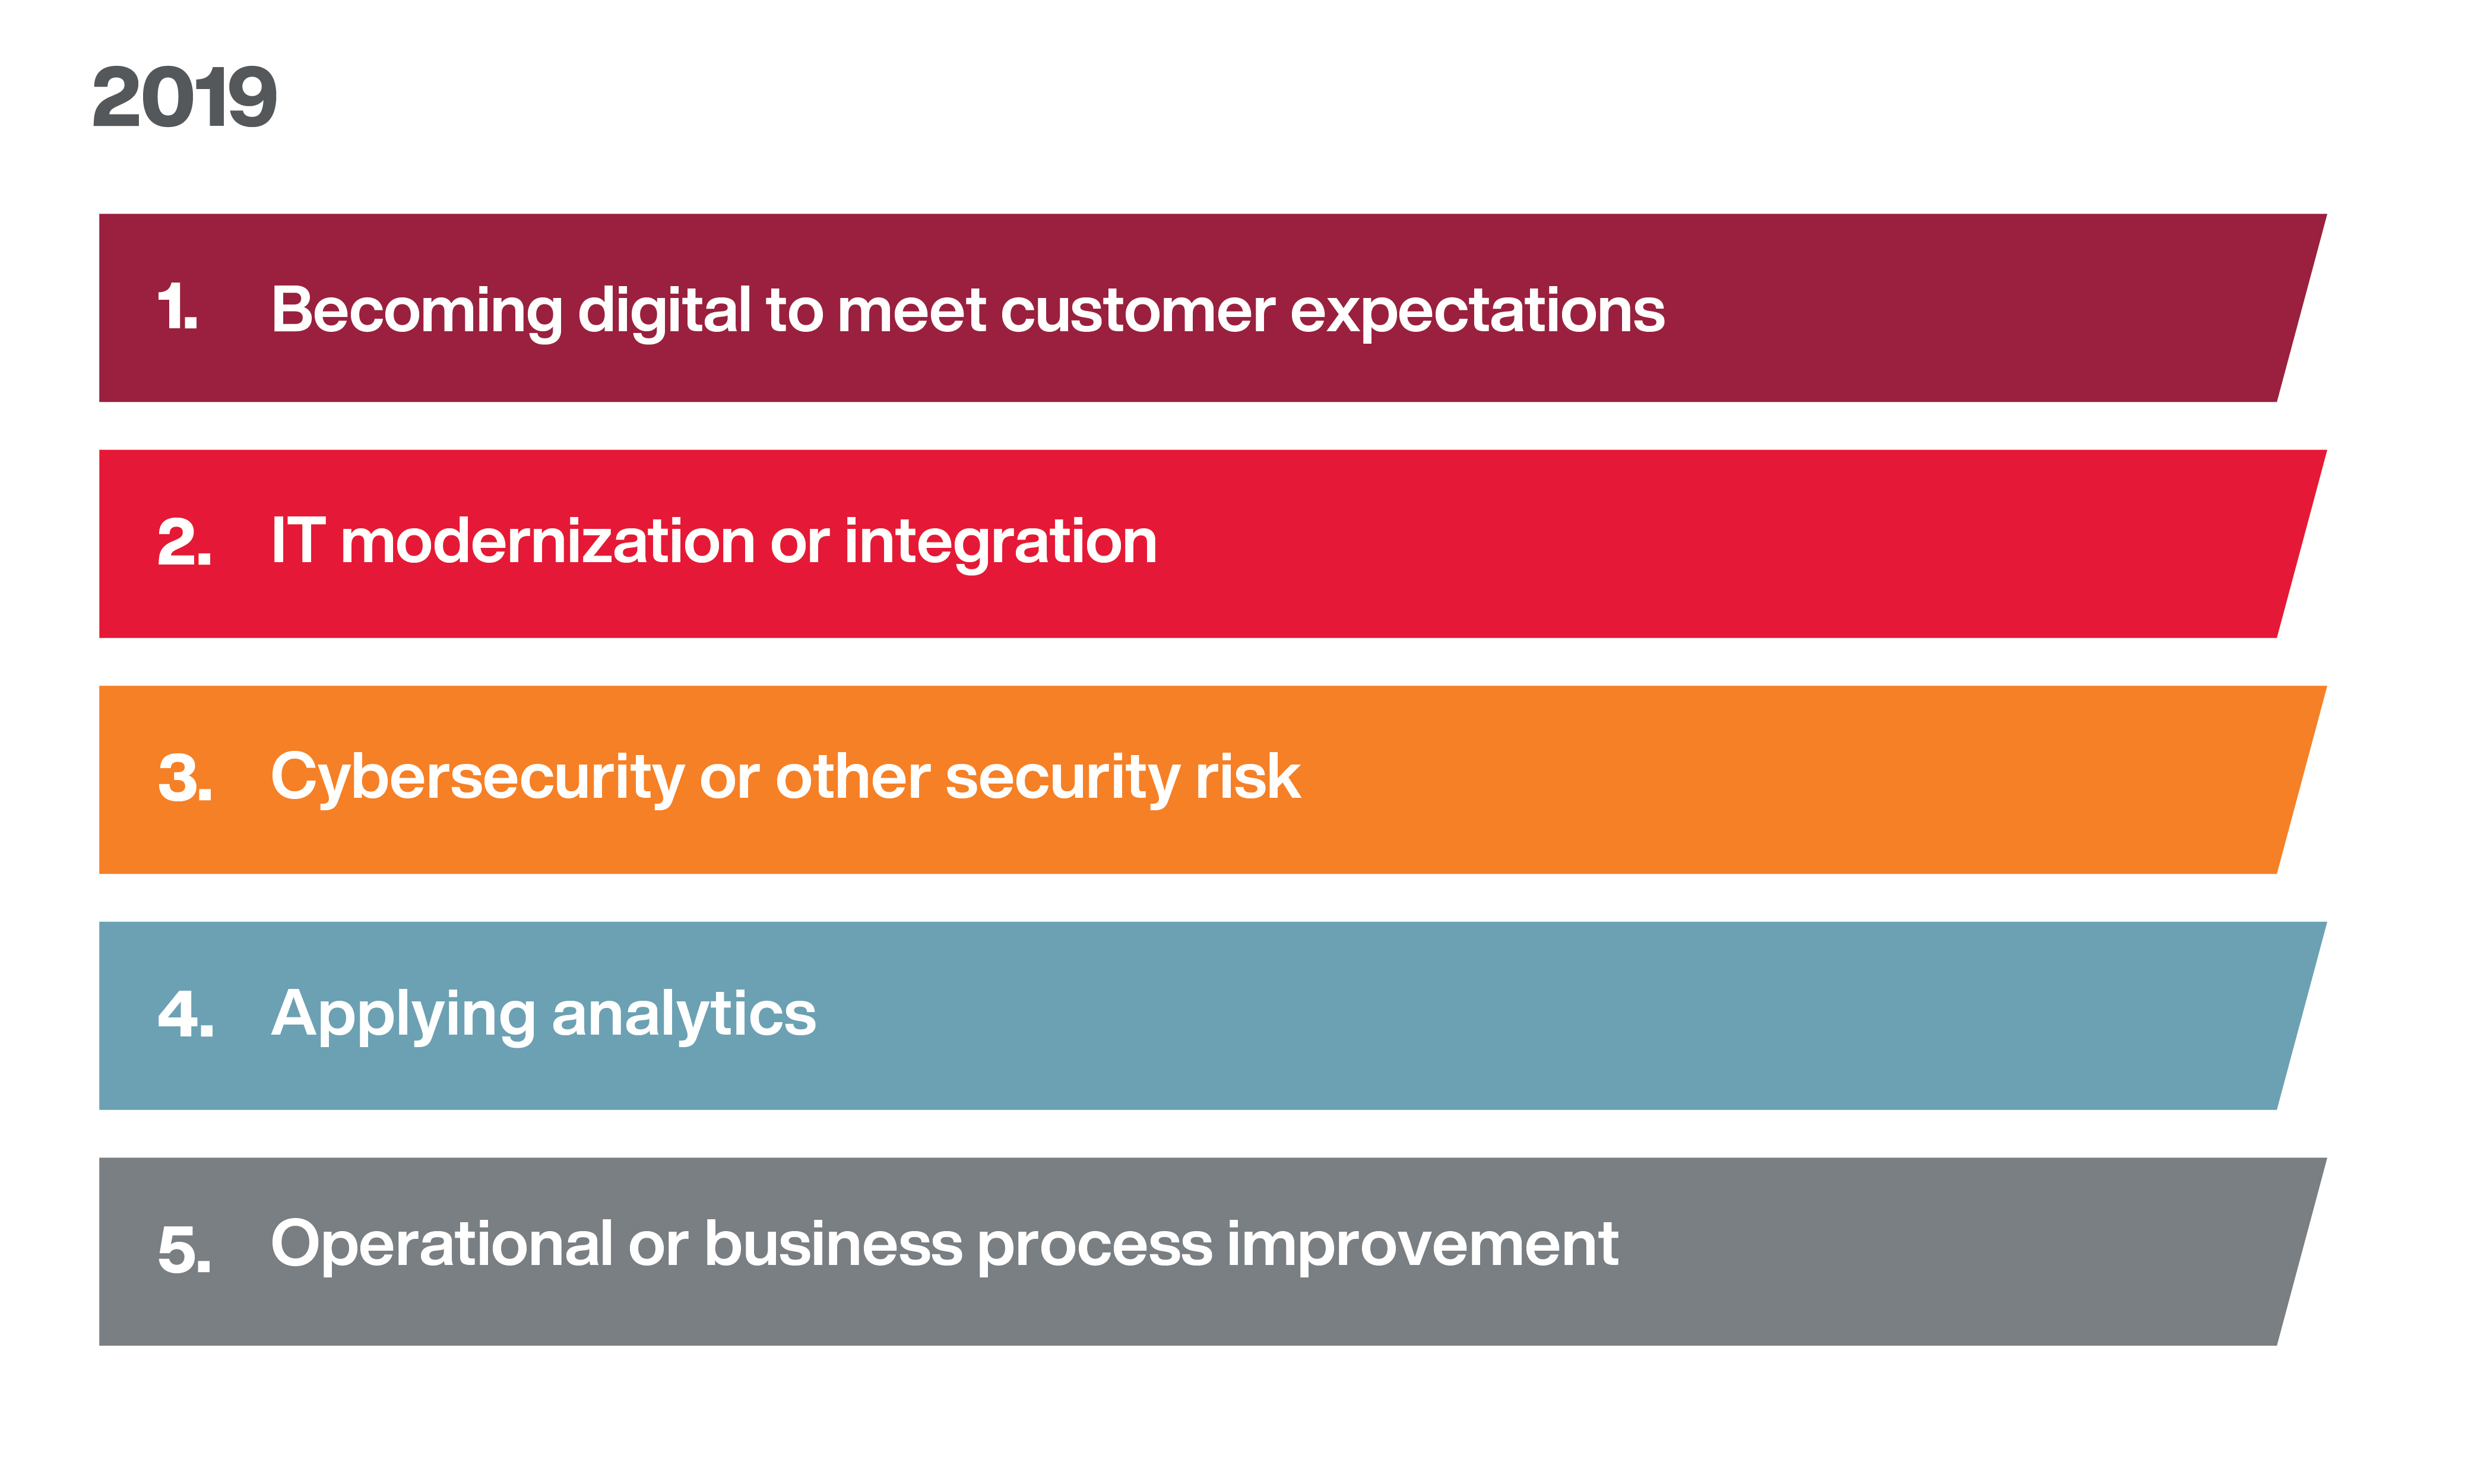 2019 top trends by impact - Becoming digital to meet customer expectations remains the highest-impact trend